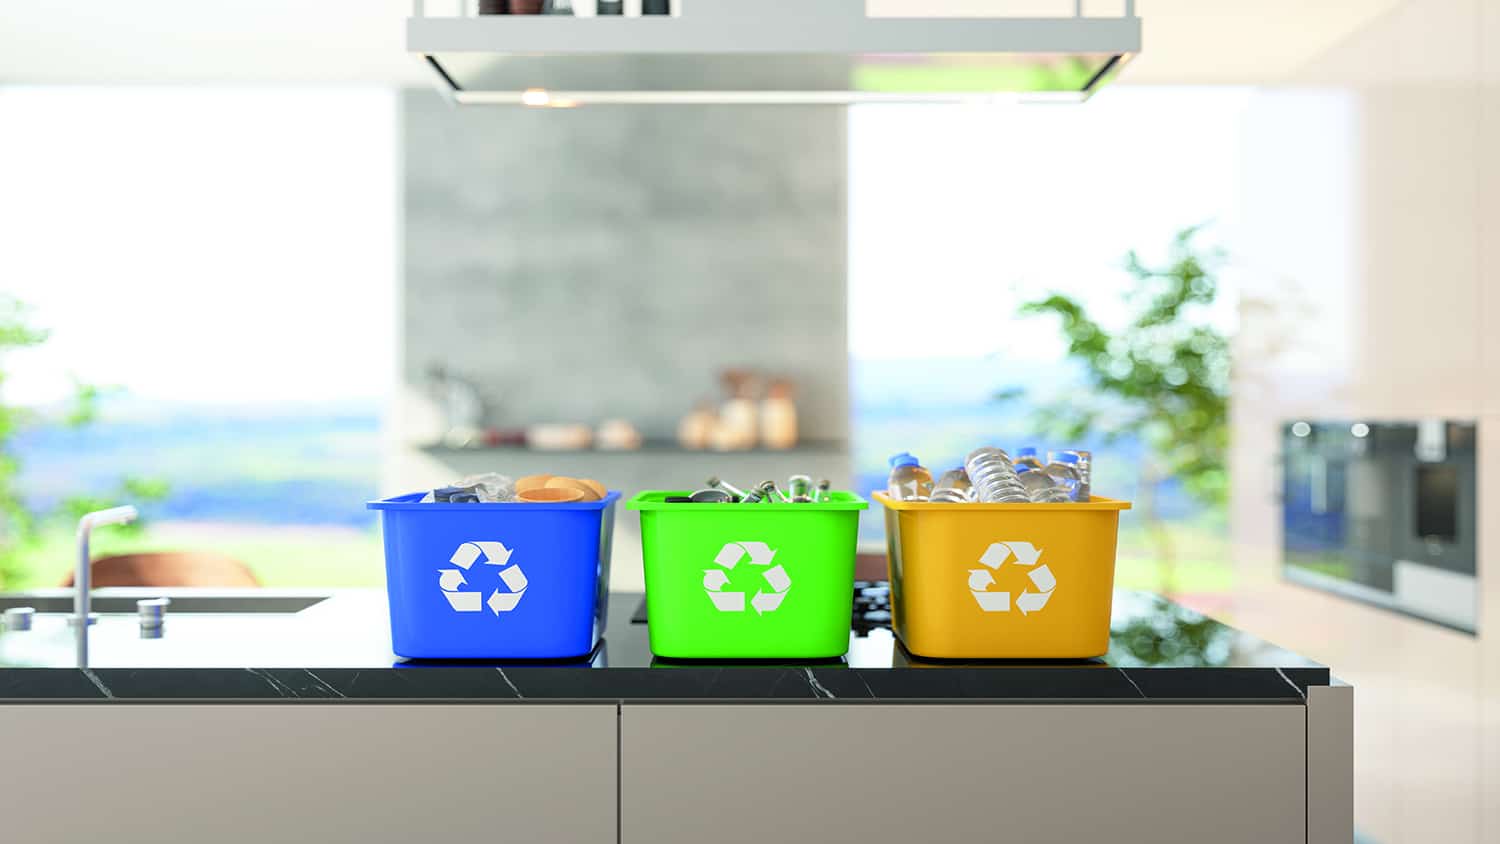 Recycling bins on kitchen island with blurred kitchen background